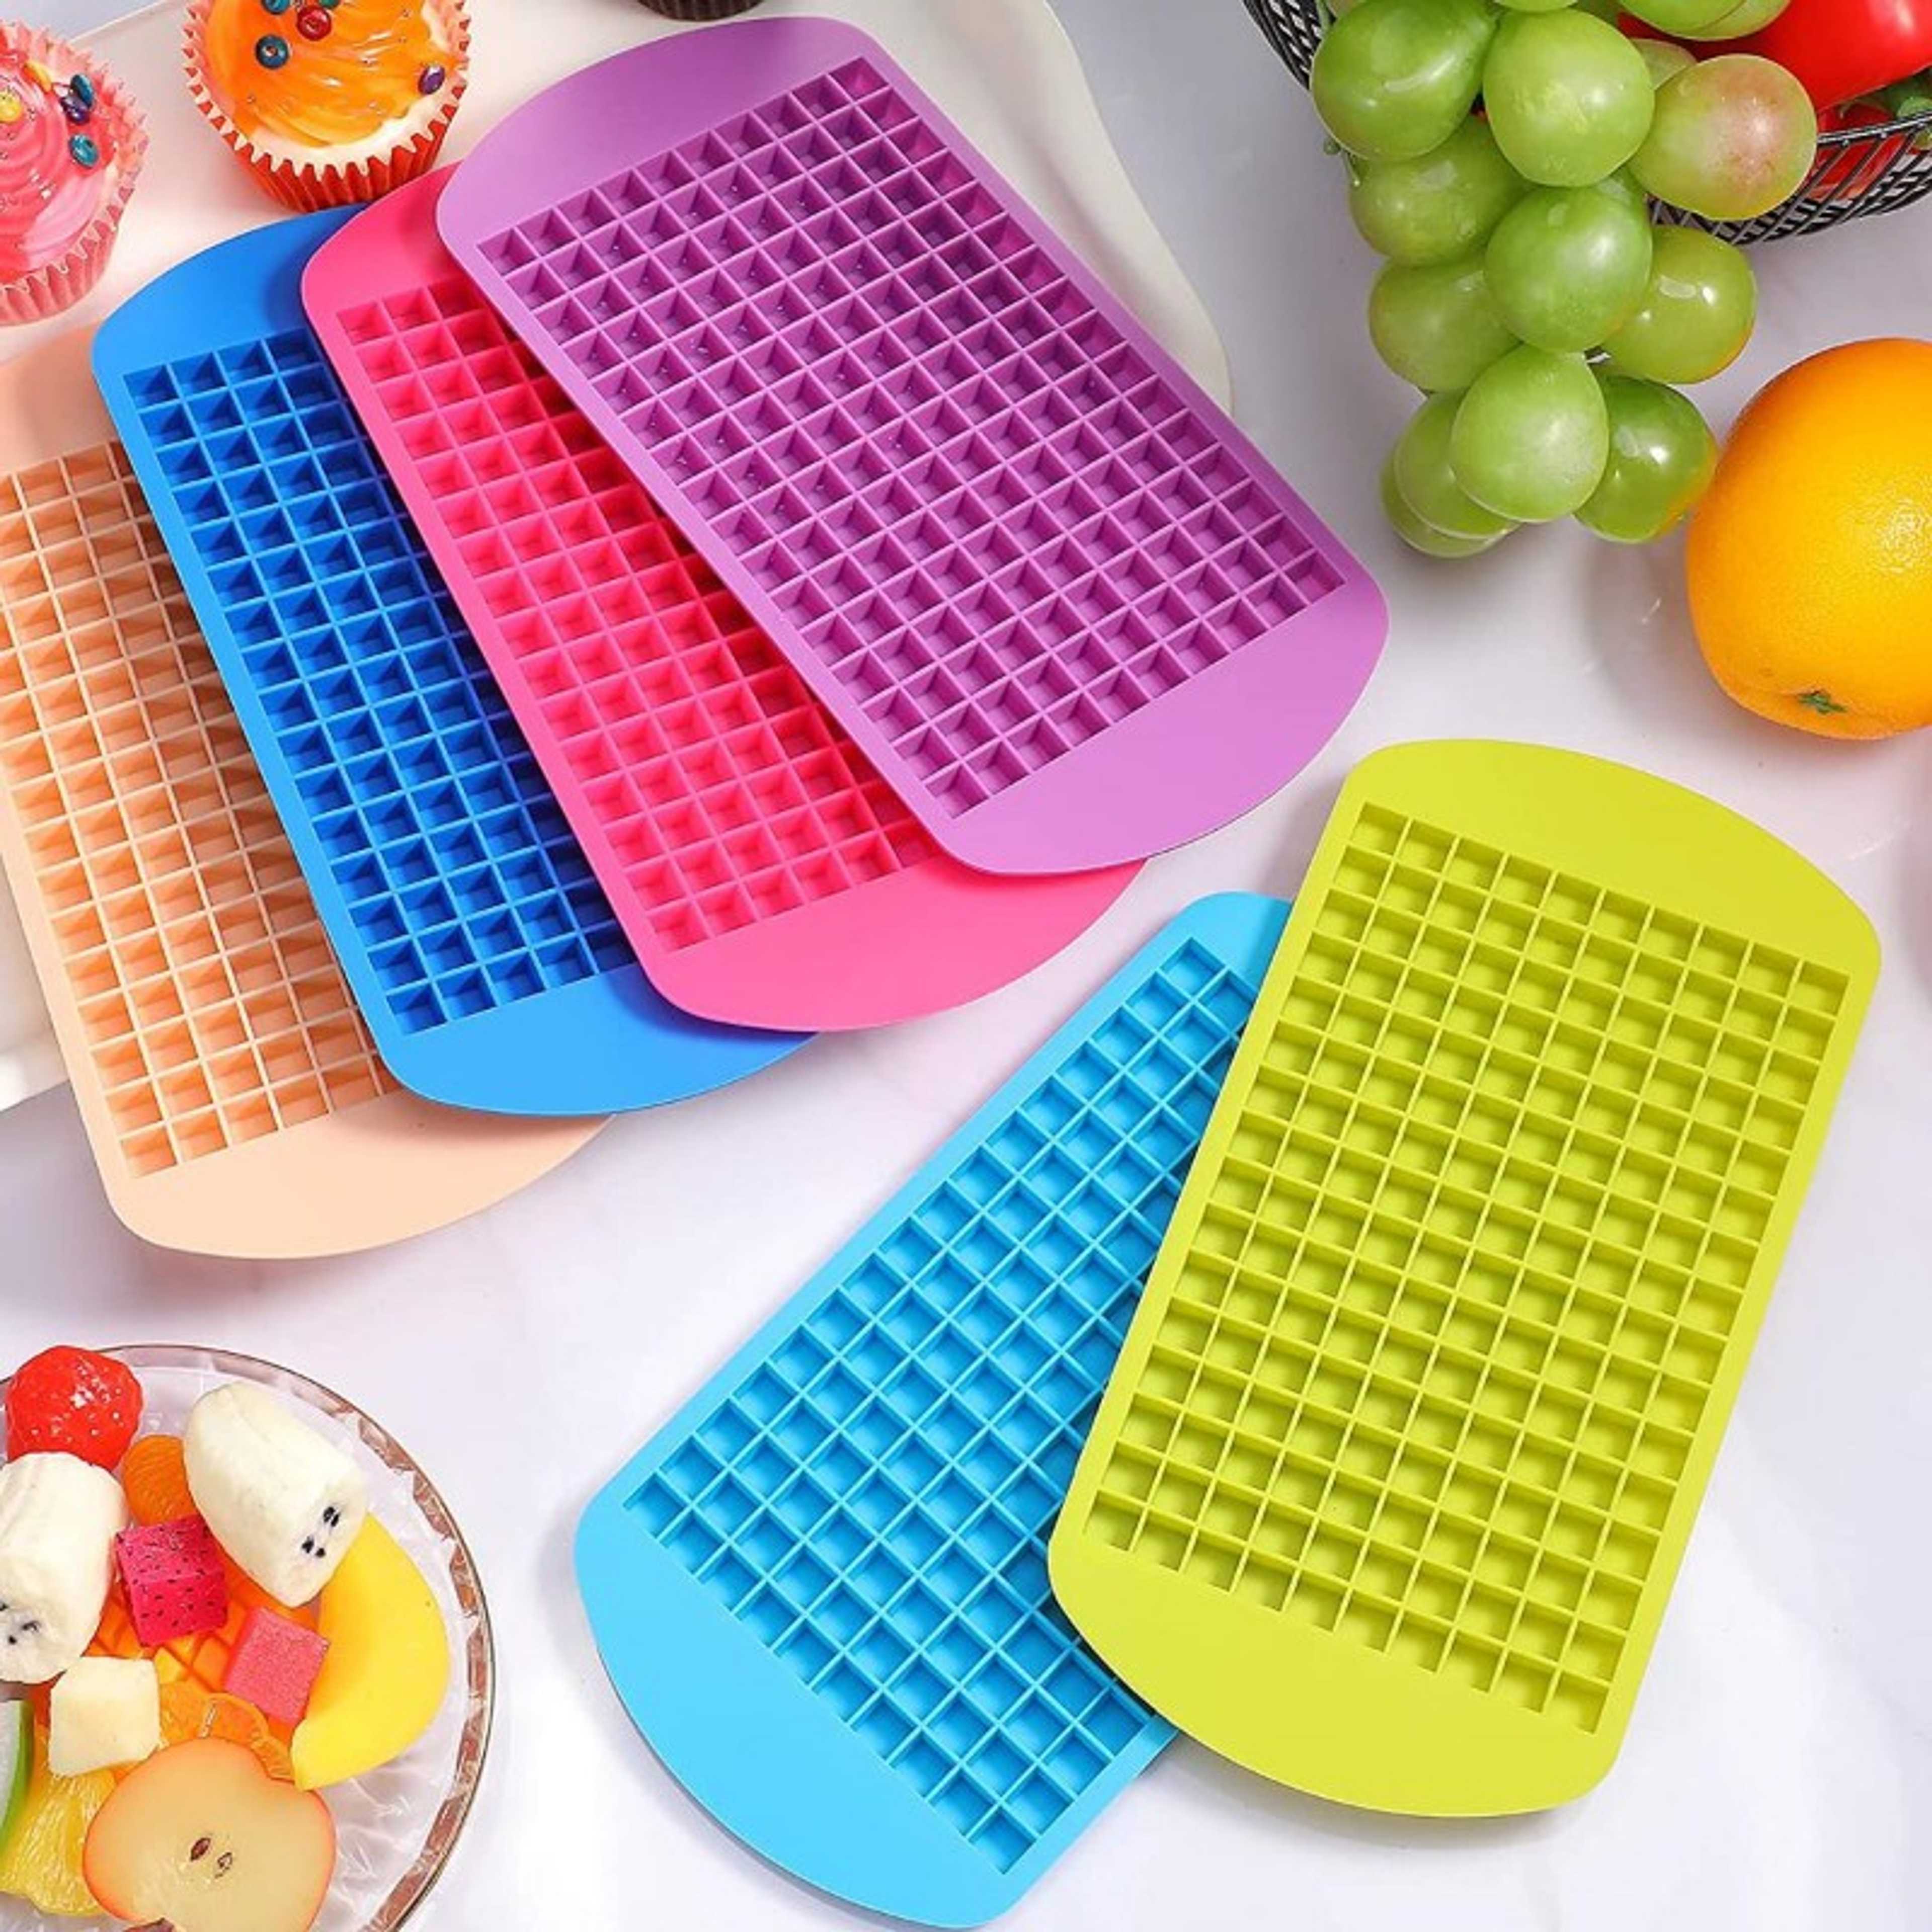 24x12x1cm 160 Grids Silicone Ice Cubes Frozen Mini Food Grade Ice Tray Fruit Maker Bar Party Pudding Tool Kitchen Accessories